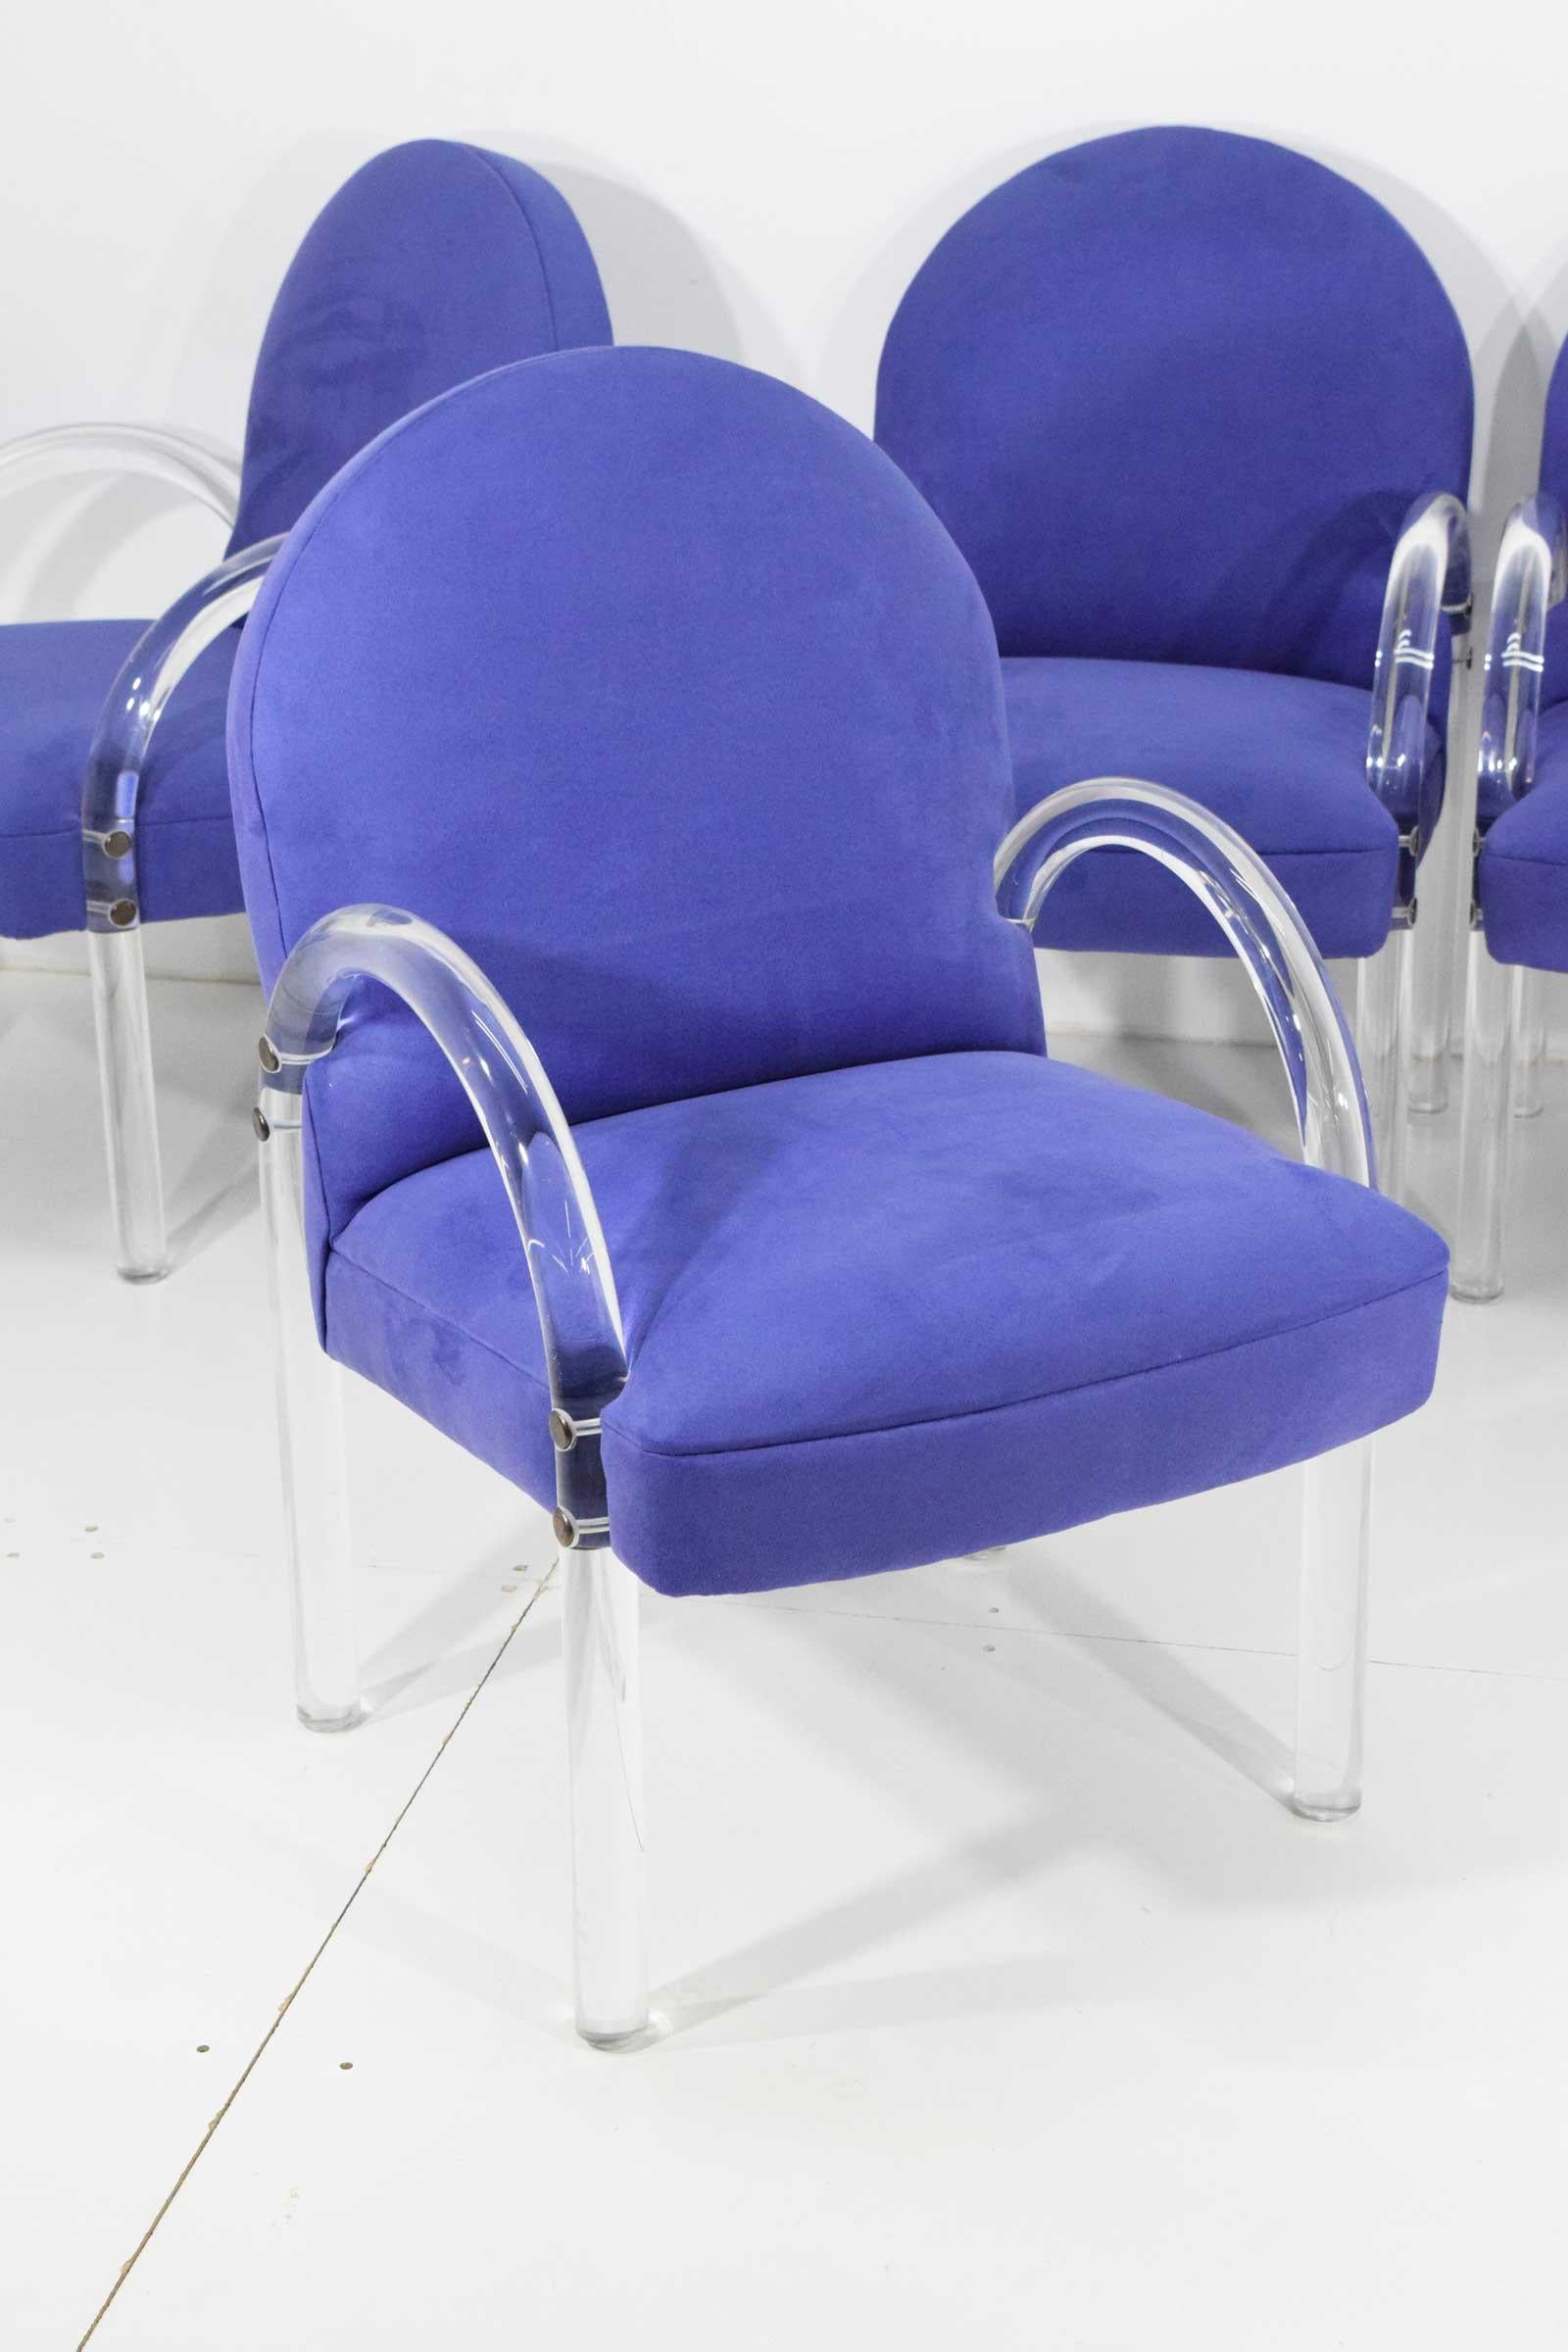 Chairs have solid curved Lucite arms and are upholstered in a rich lavender microfiber. Brass fittings. Upholstery is wonderful or you can change if you desire. Foam is great as well.
 